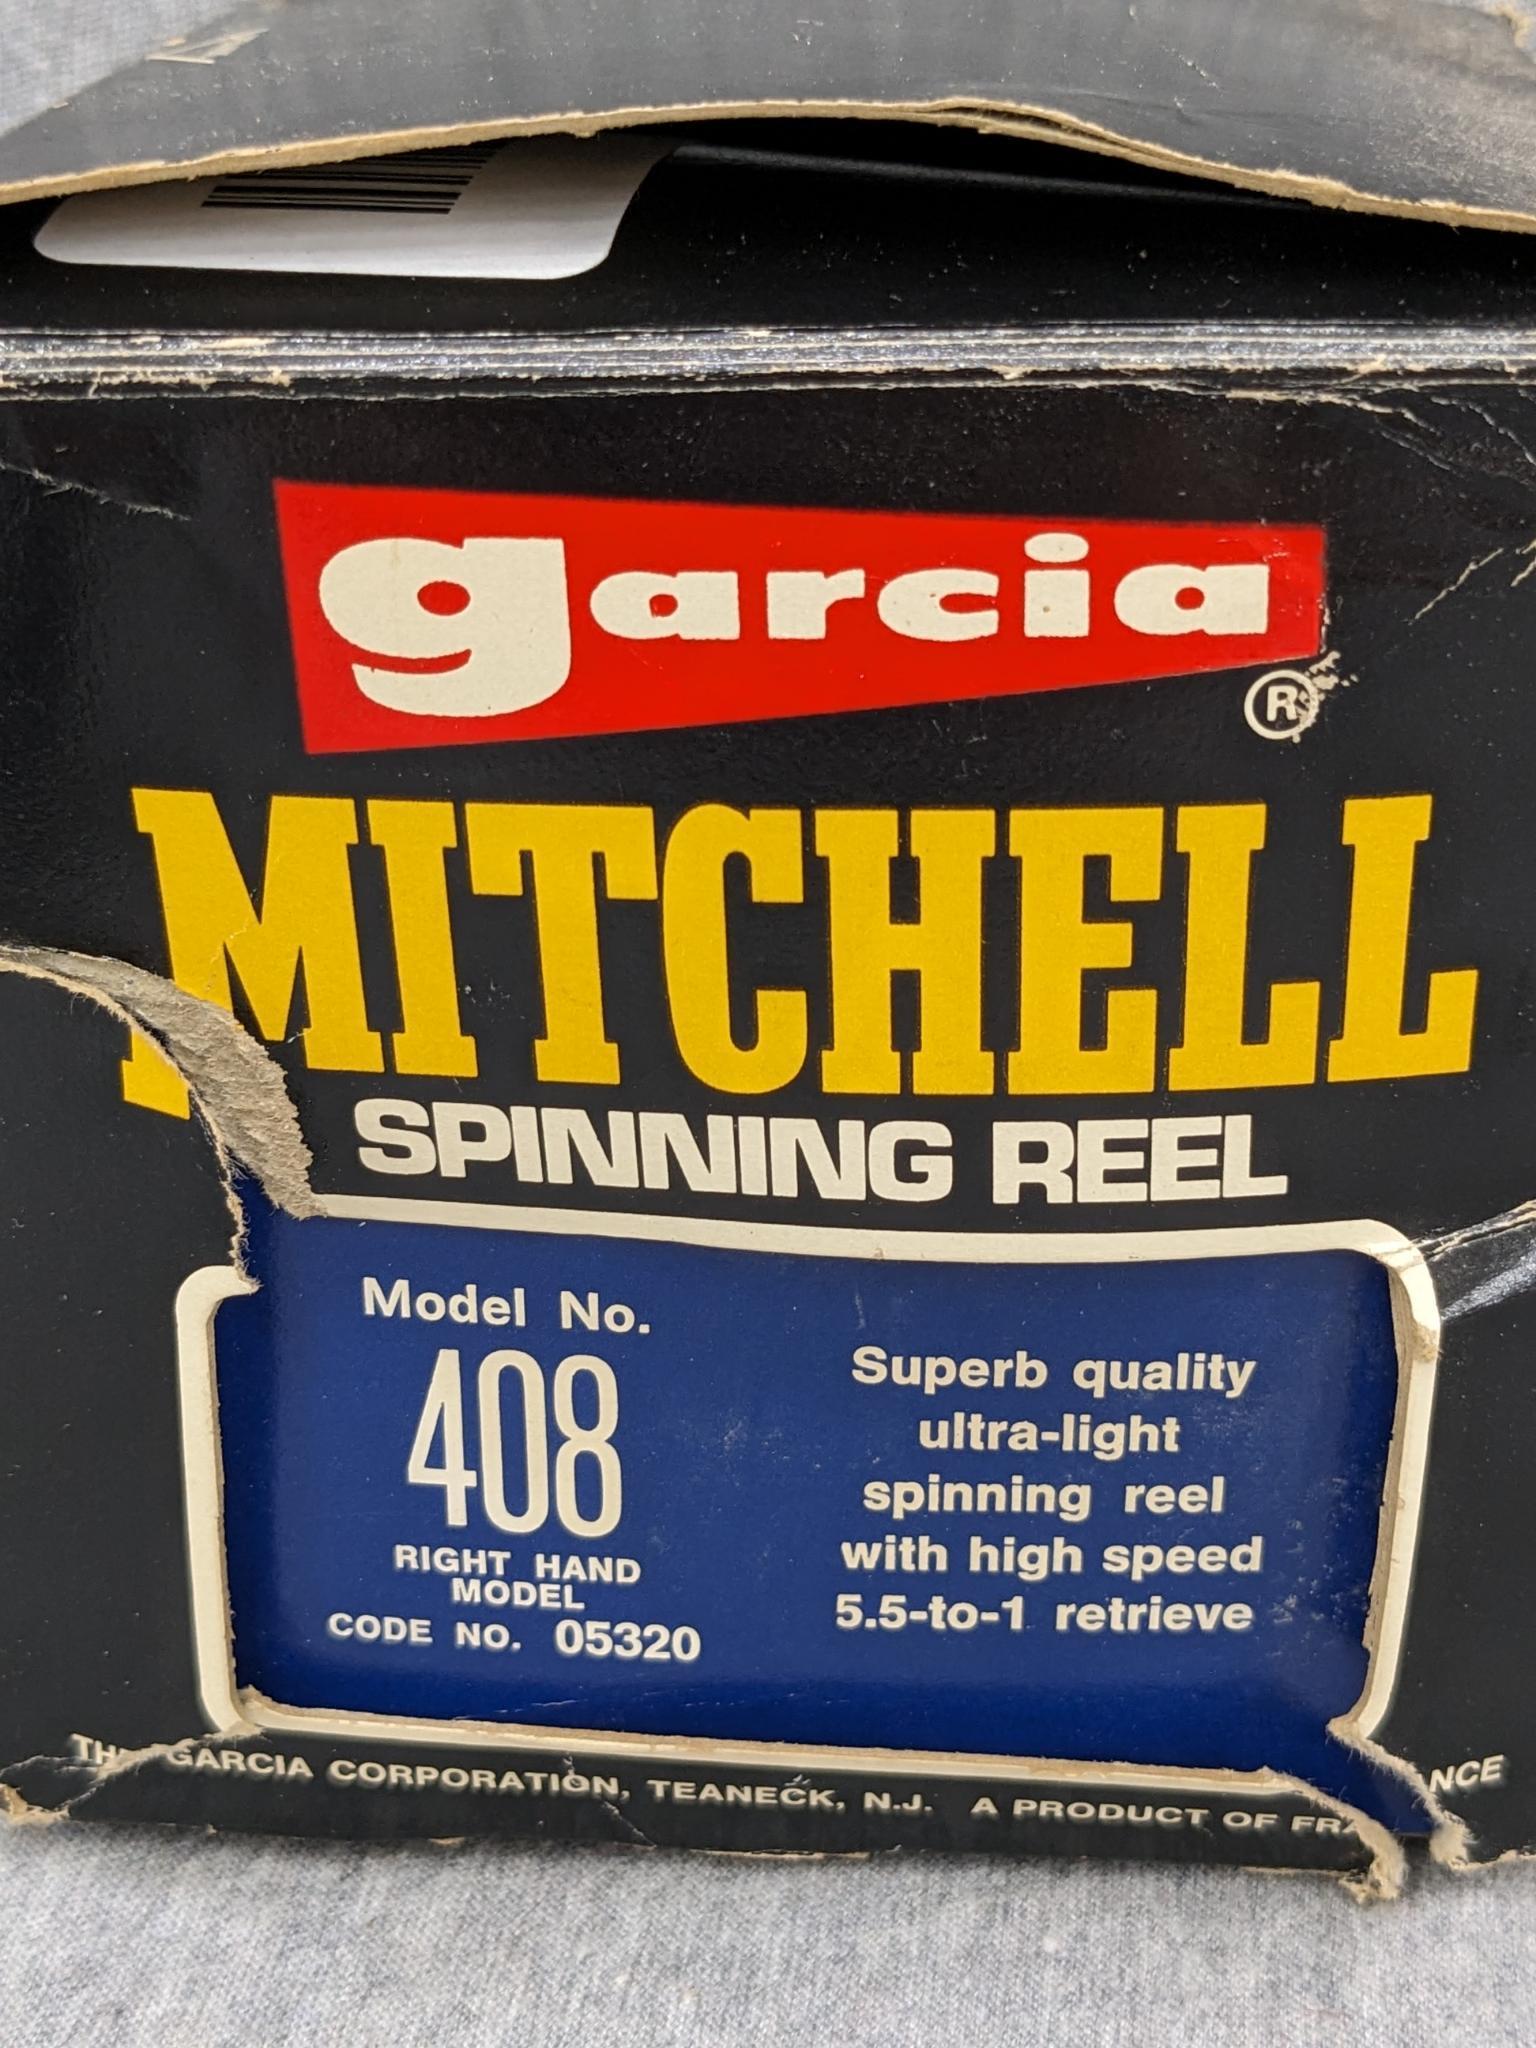 Vintage Garcia Mitchell 408 spinning reel with